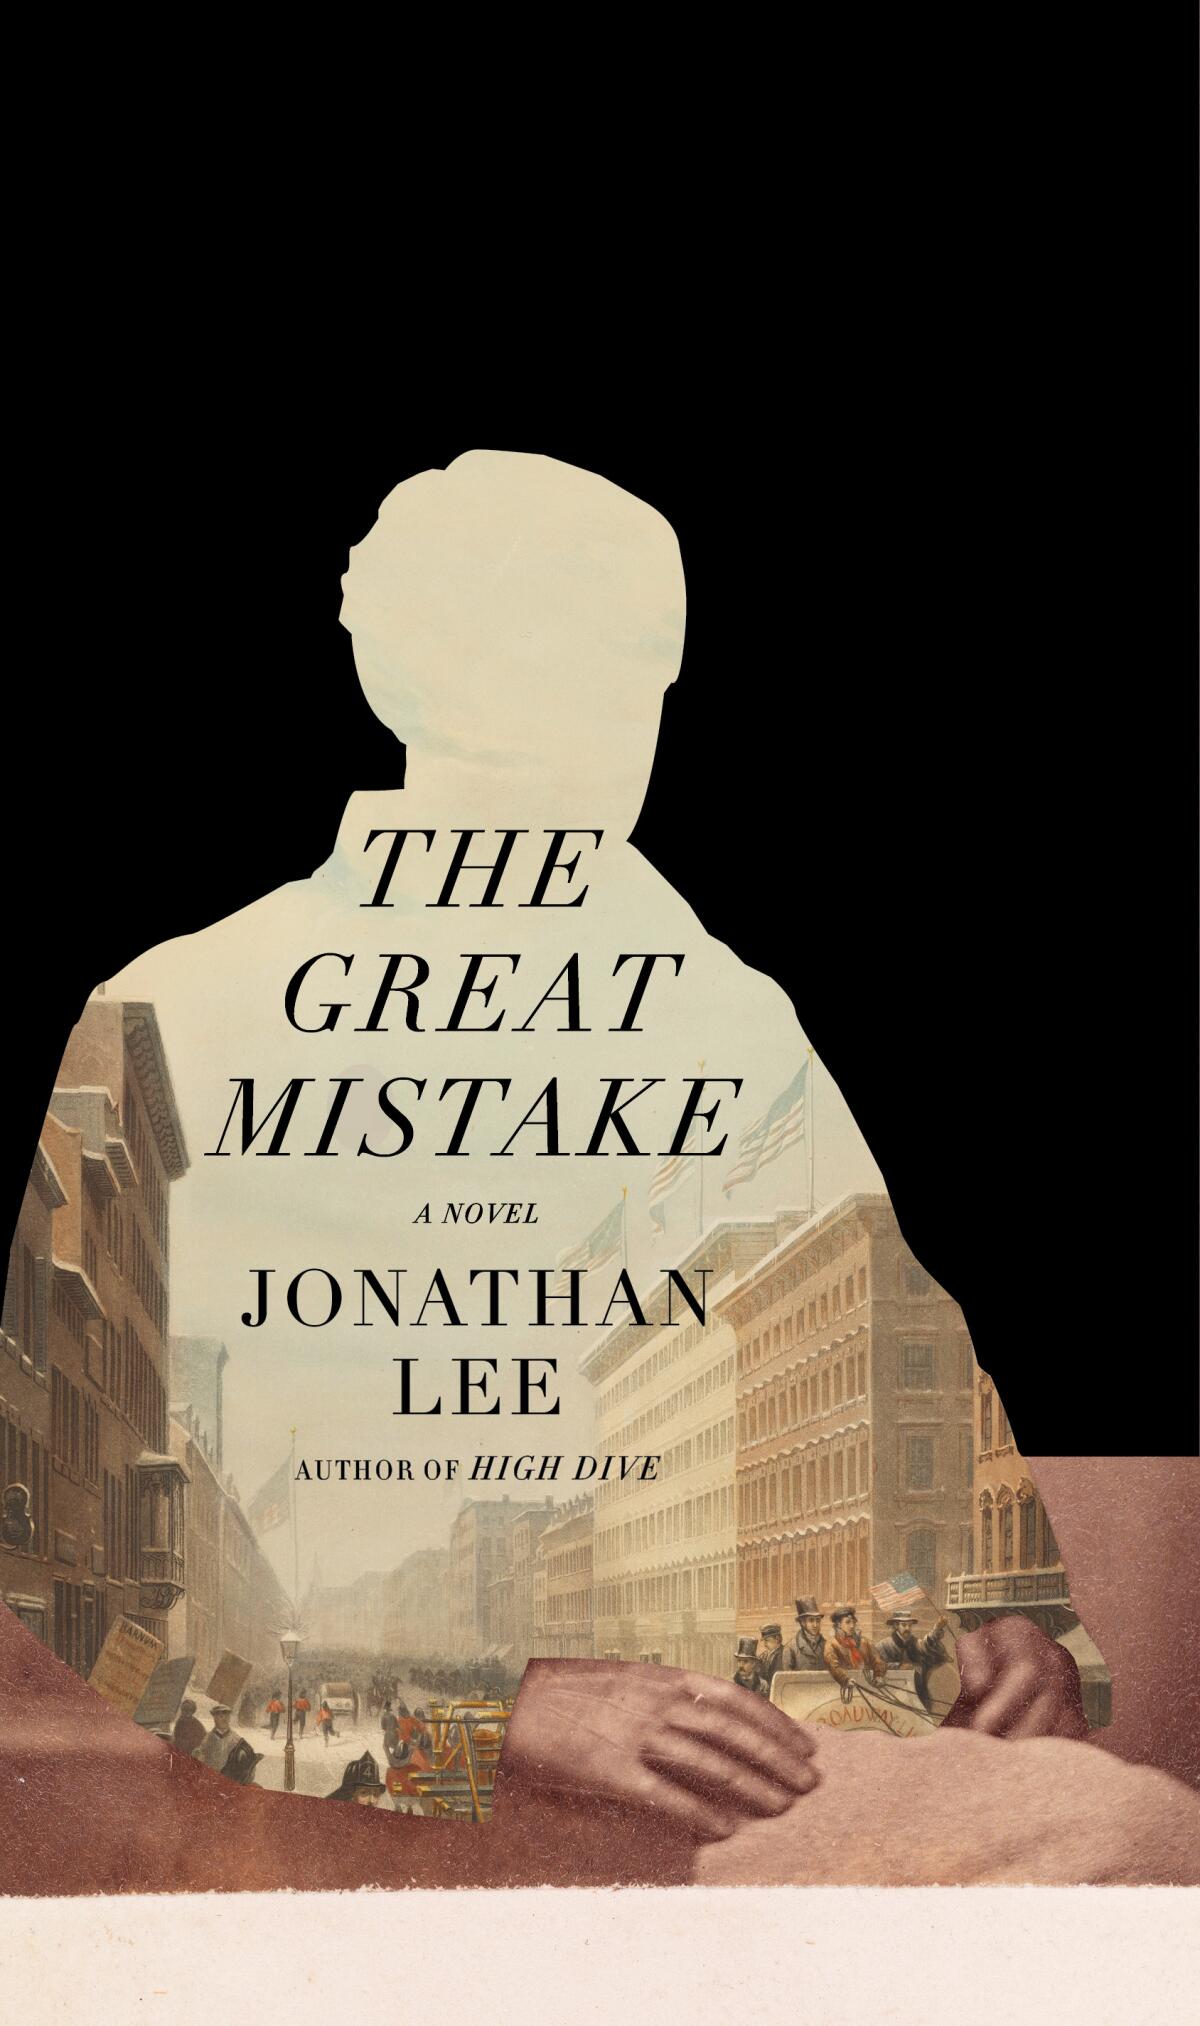 The book cover for  Jonathan Lee's "The Great Mistake"